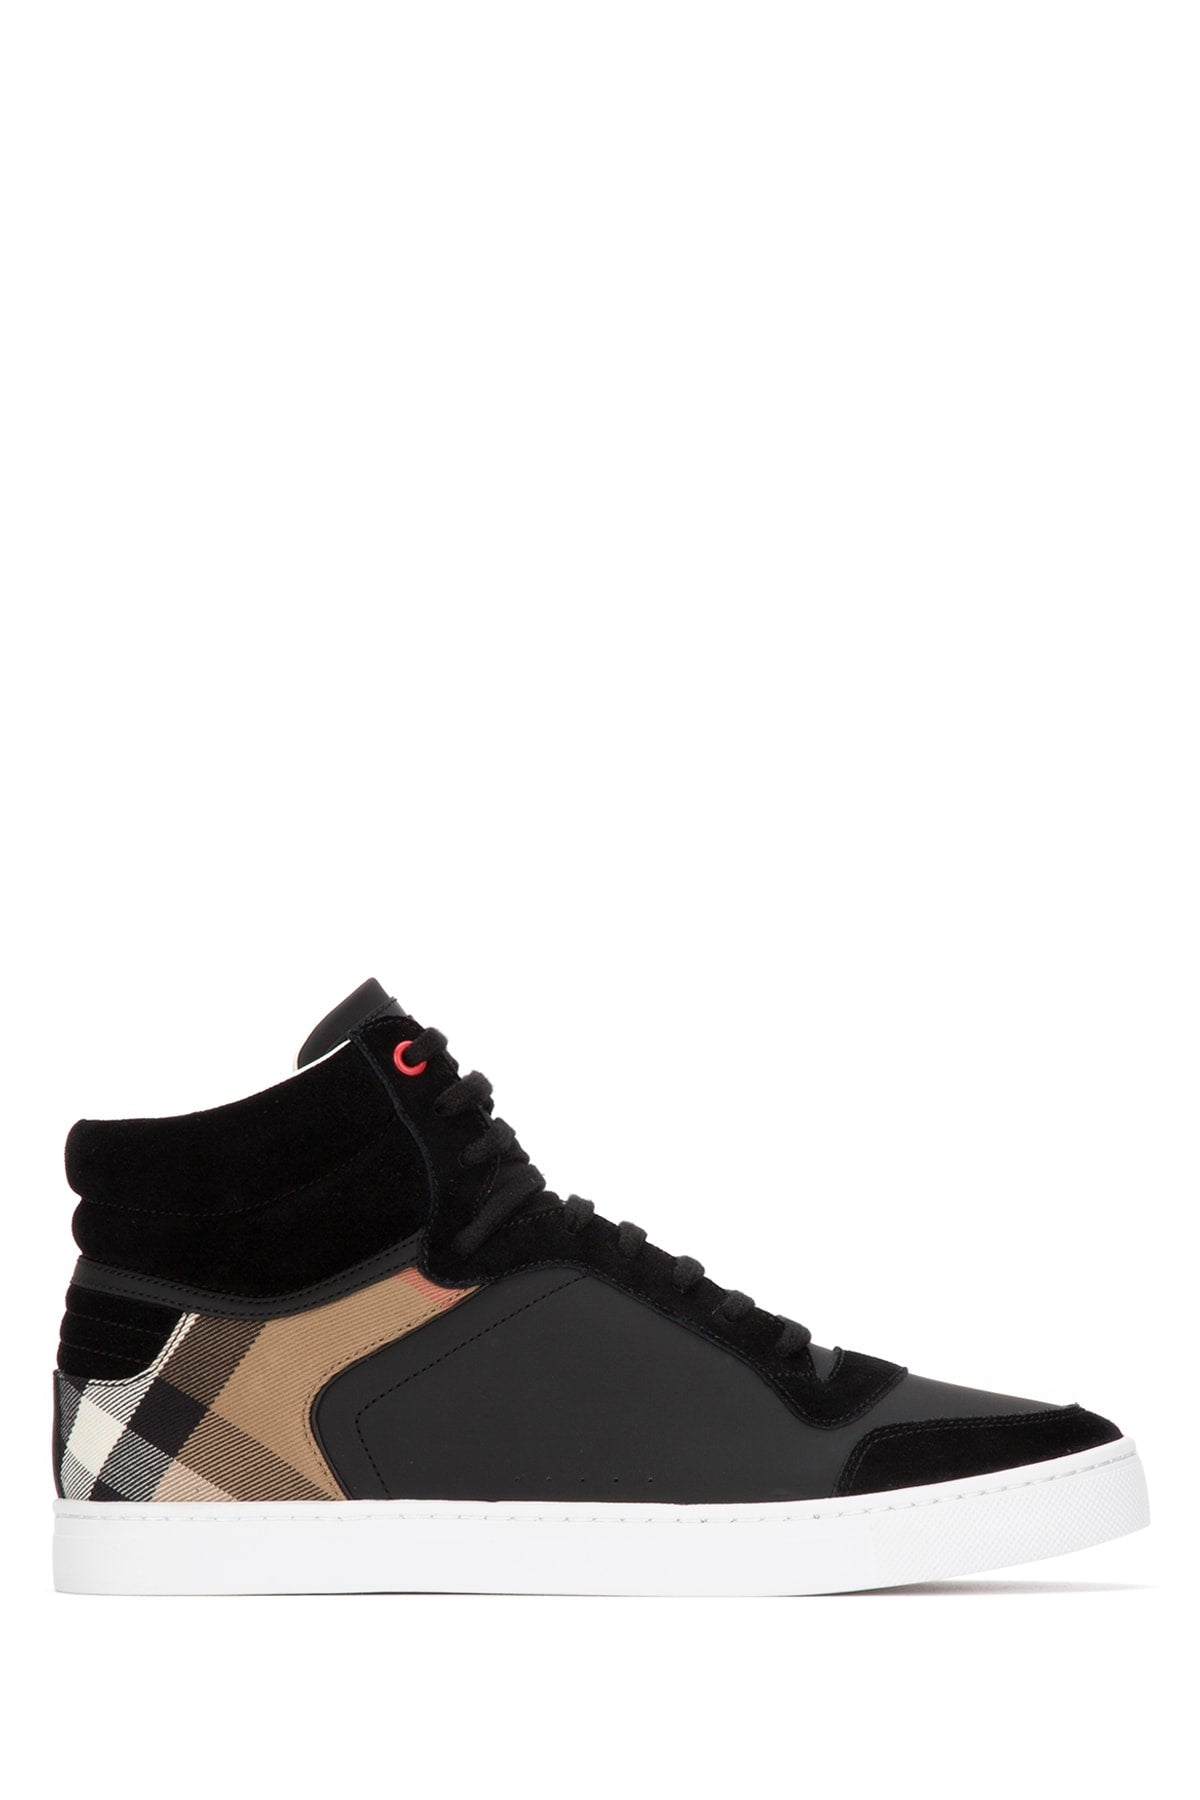 BURBERRY BURBERRY HOUSE CHECK HIGH-TOP SNEAKERS